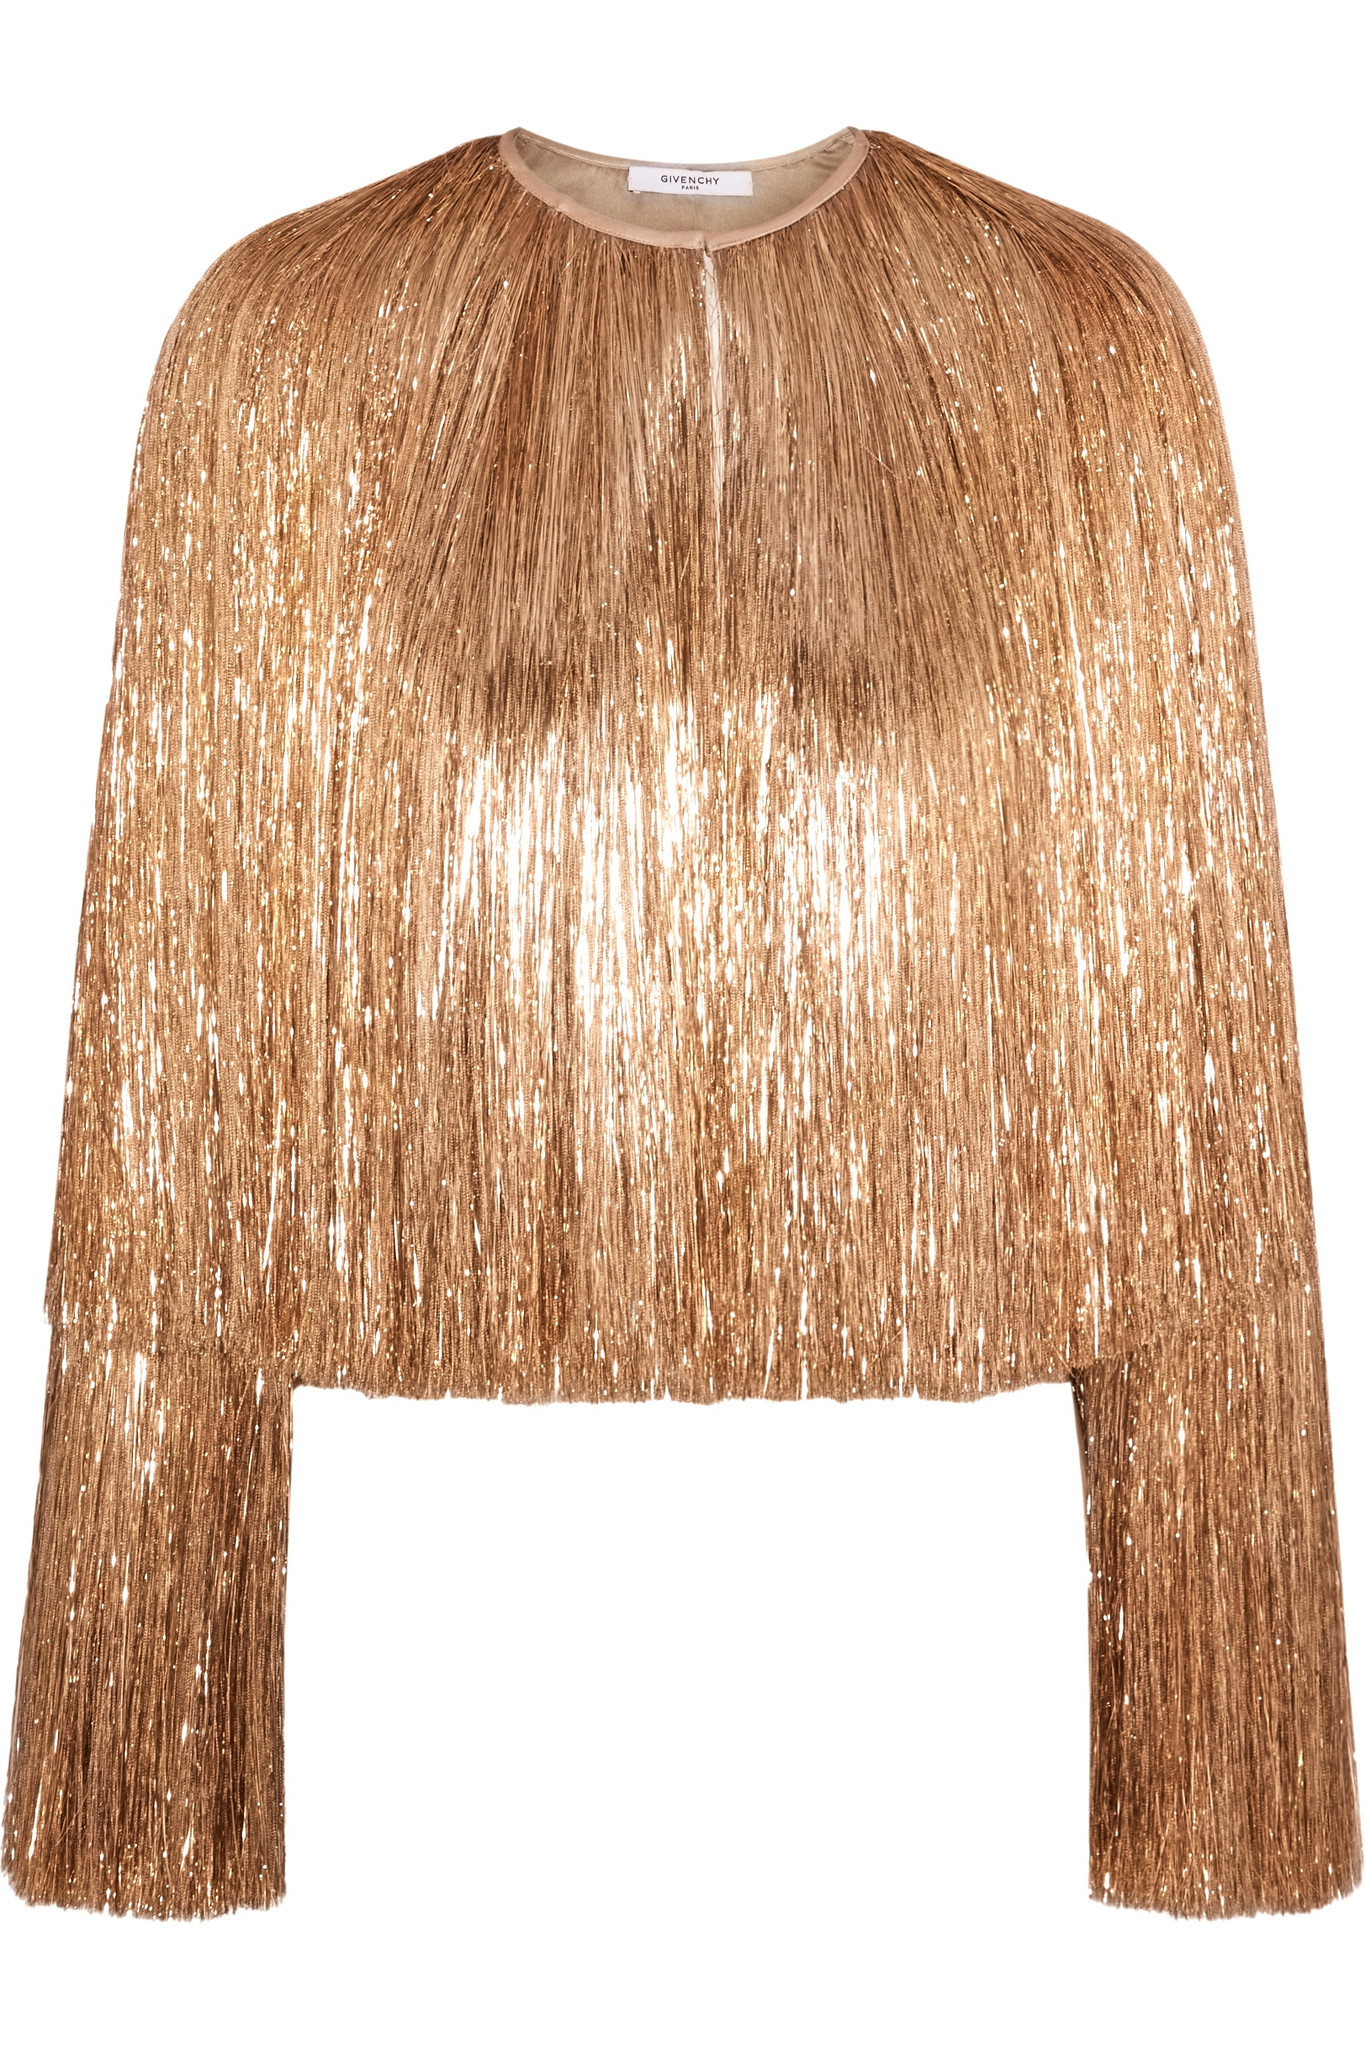 Givenchy Fringed Jacket In Gold Silk-satin in Metallic - Lyst